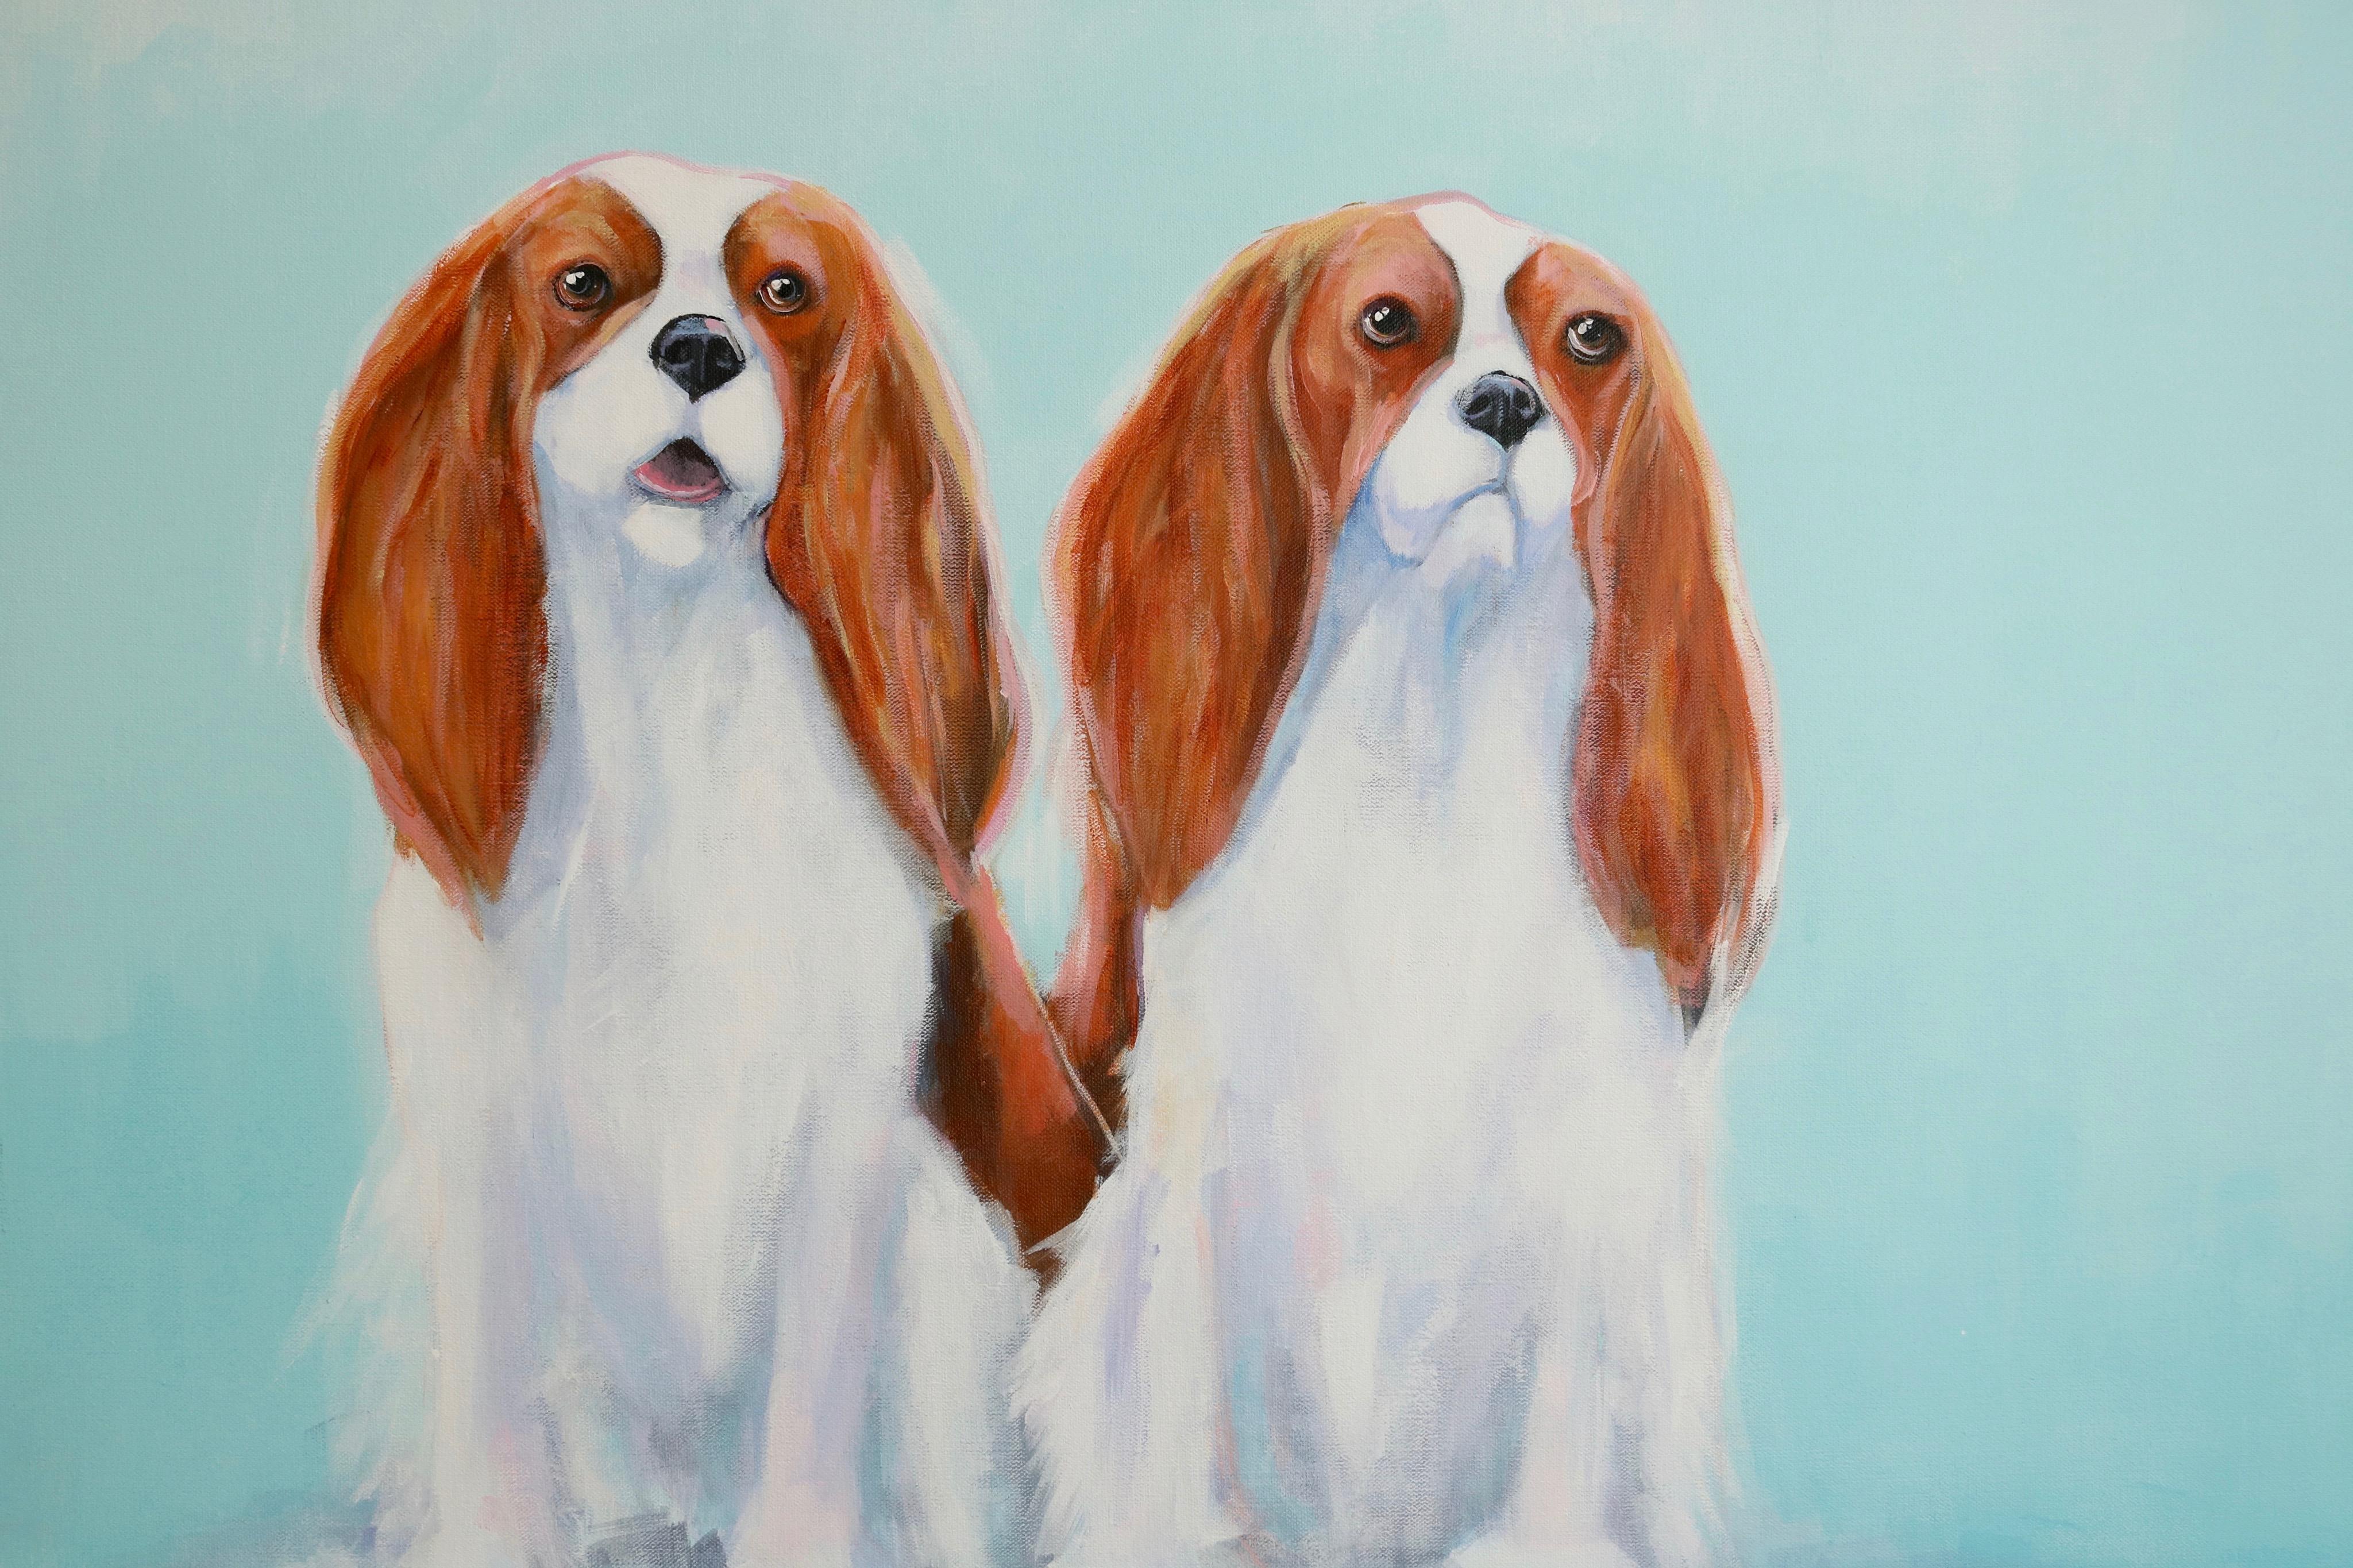 <p>Artist Comments<br />I have painted over 500 dogs and one thing I've noticed is that Cavalier King Charles Spaniels are the sweethearts of the dog world, and they often come in pairs. My guess is that they are just so wonderful that one is quite